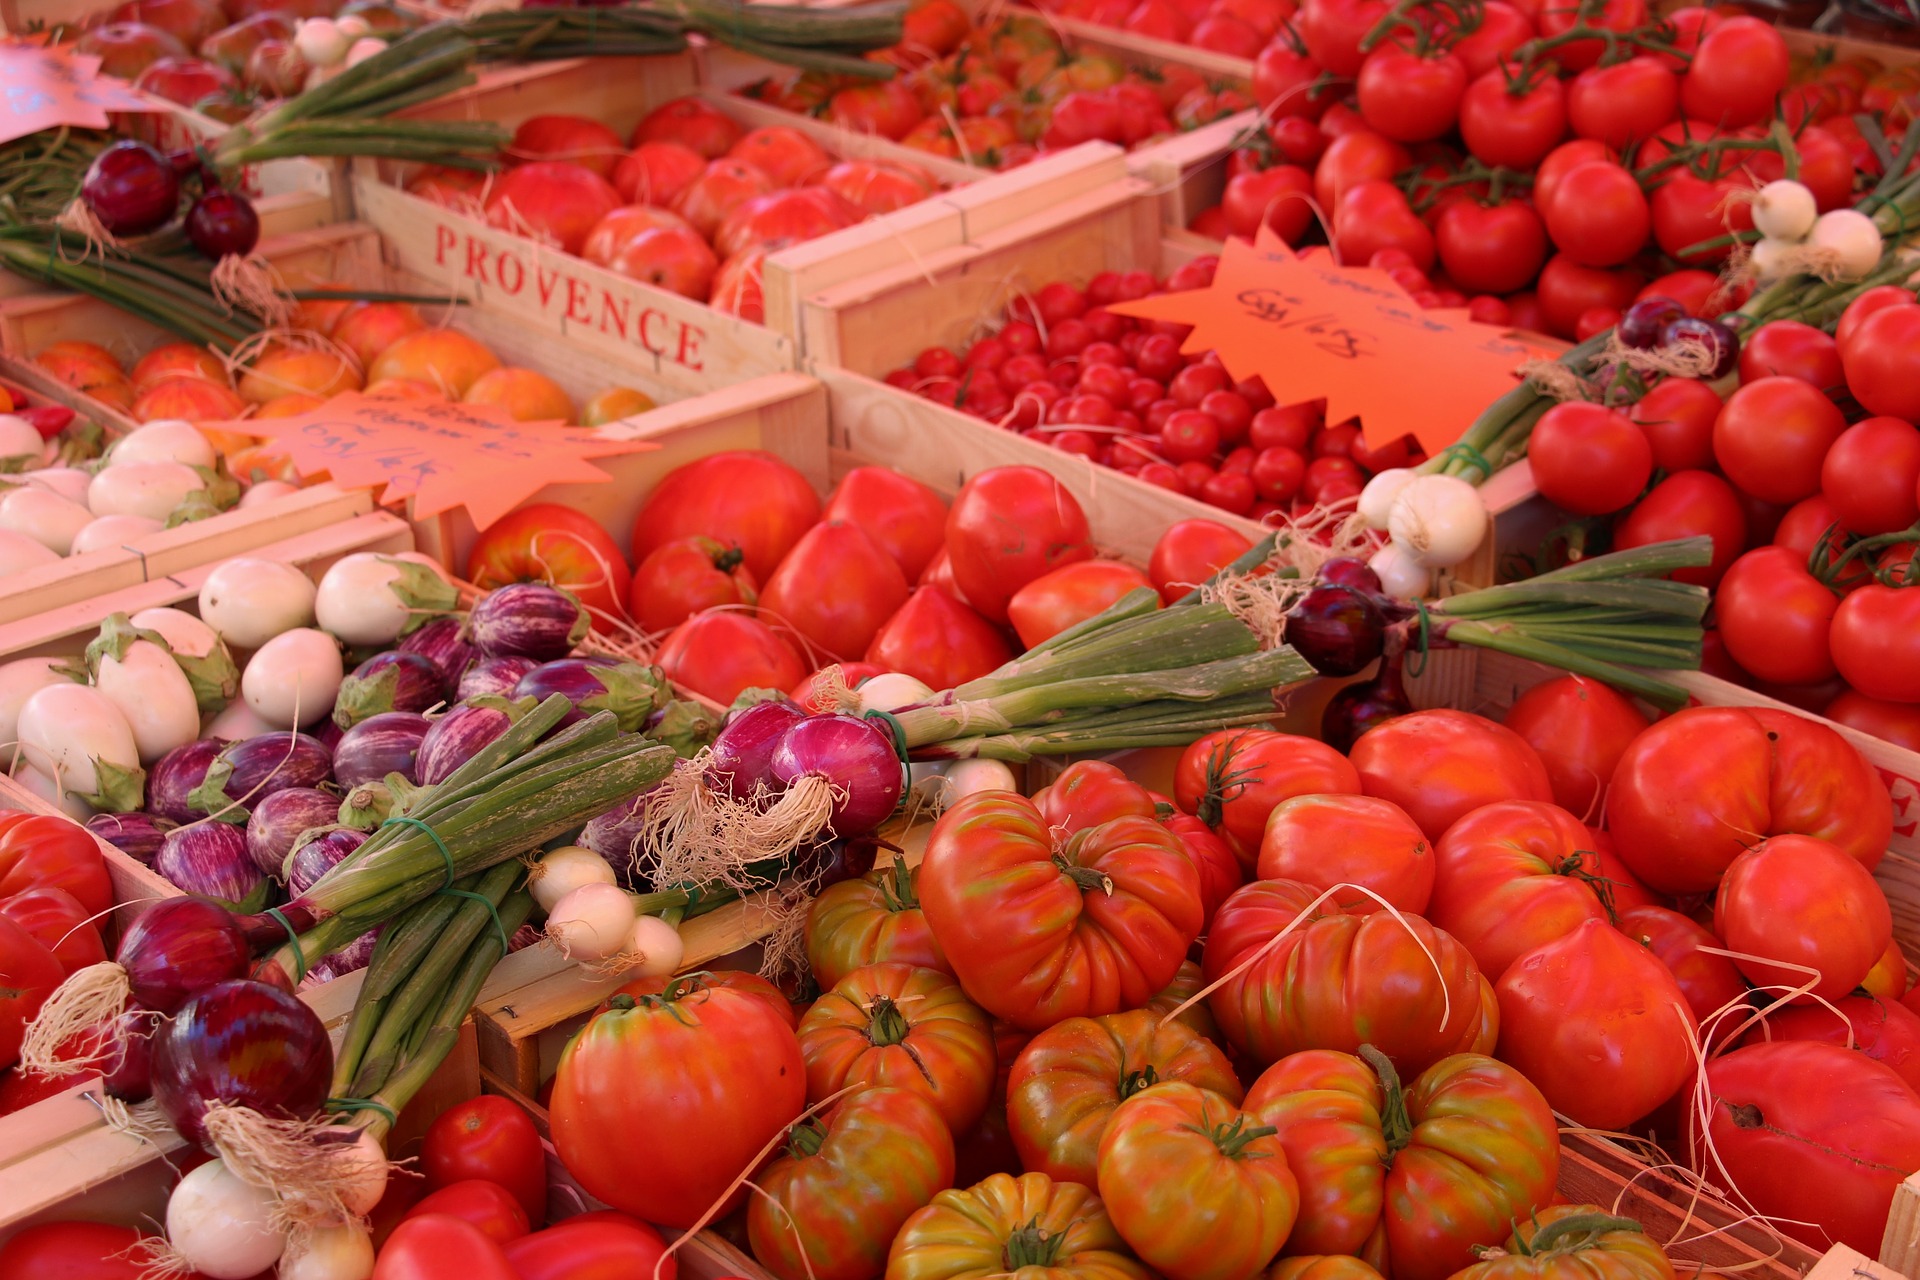  The markets of Provence